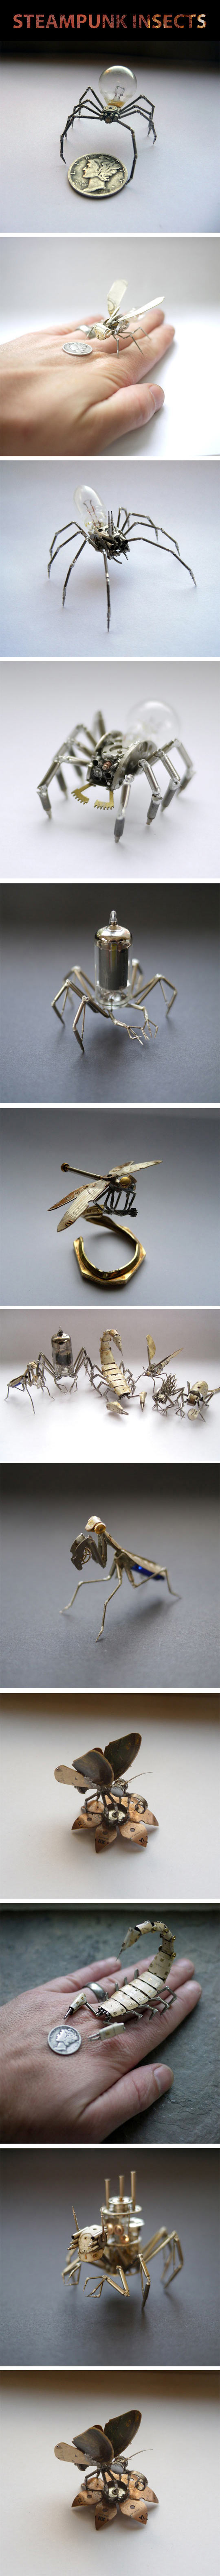 Tiny Insects Made Out Of Watch Parts